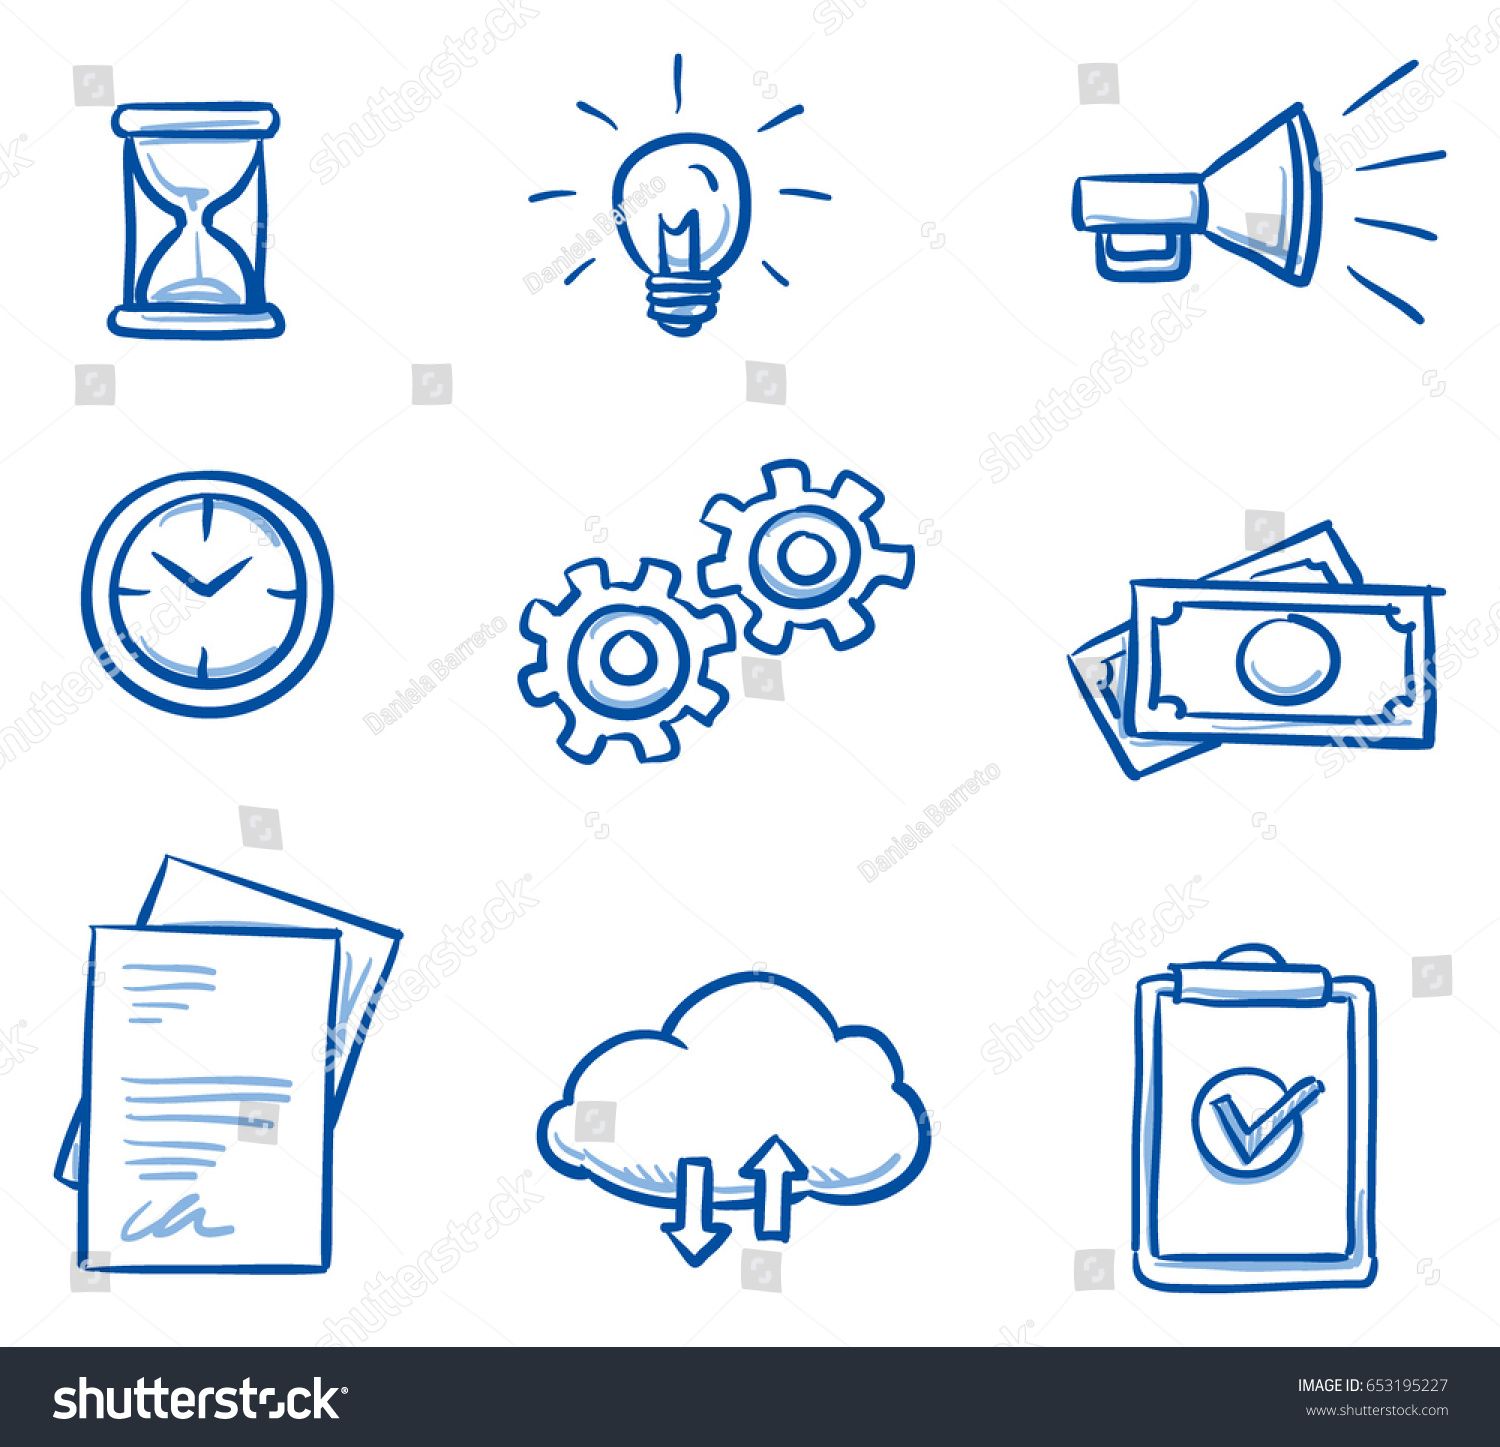 Set with different business icons, as file sharing cloud